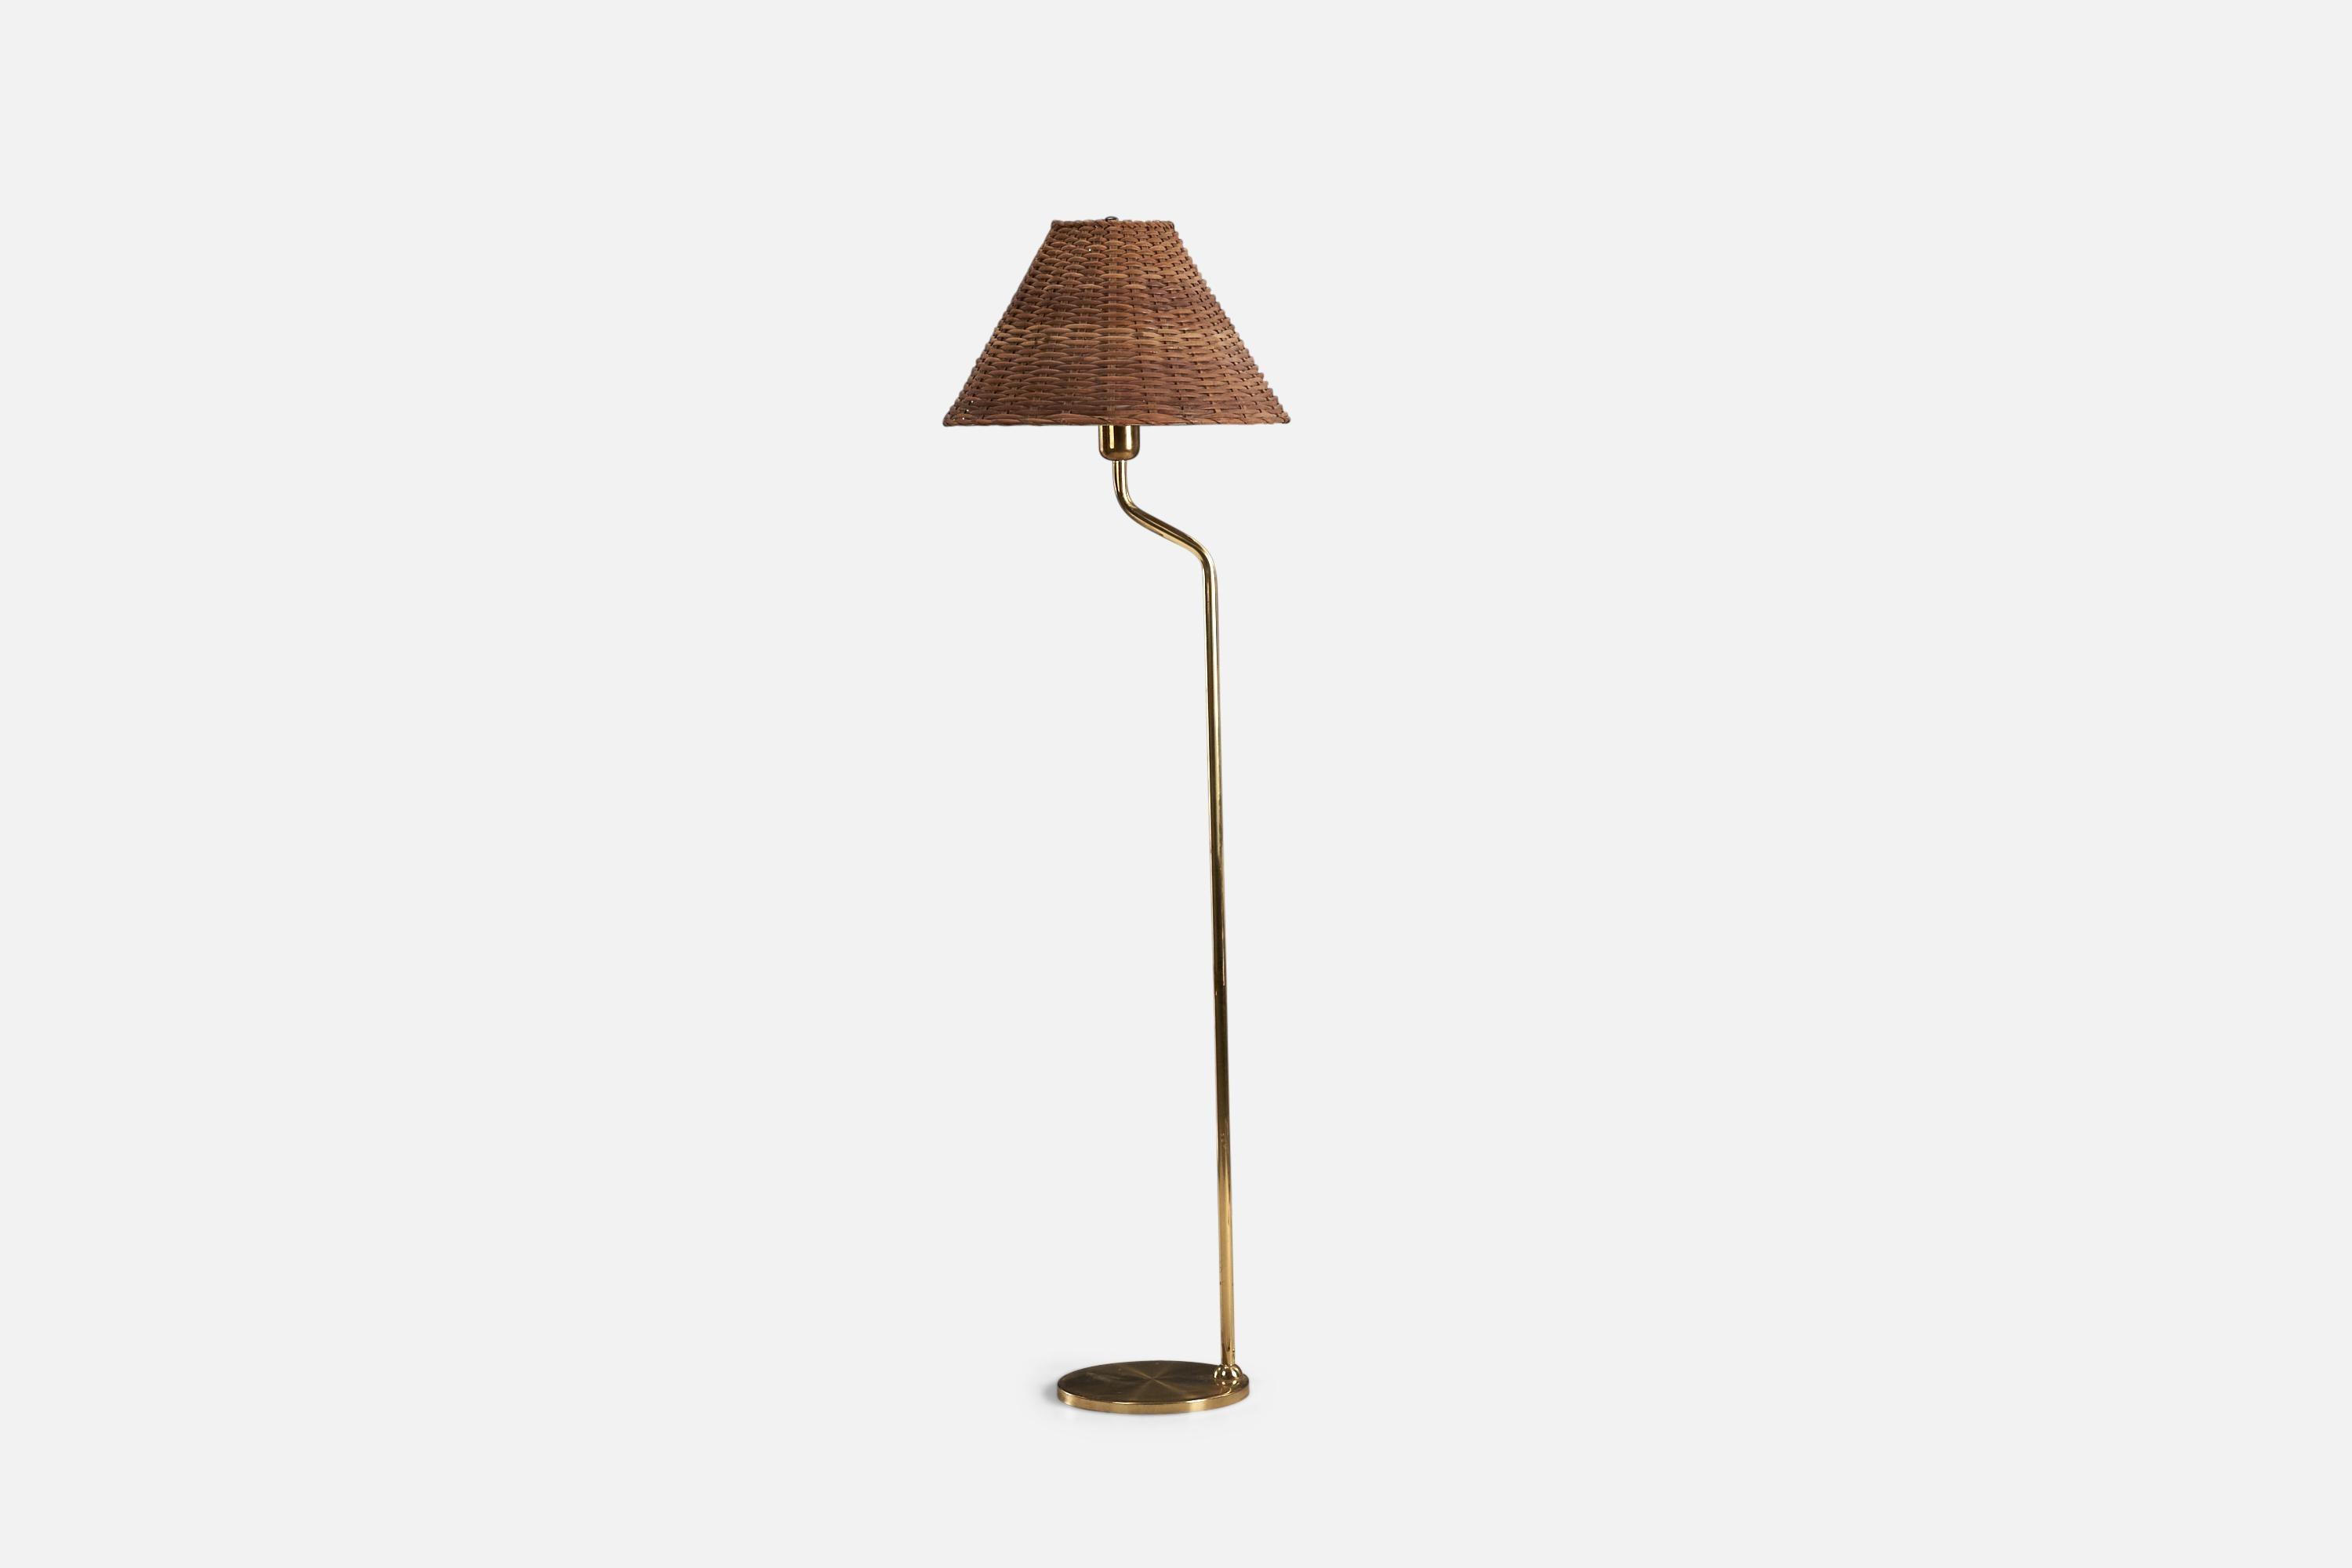 A brass and rattan floor lamp designed and produced by Nya Öia, Sweden, 1970s.

Socket takes standard E-26 medium base bulb.

There is no maximum wattage stated on the fixture.